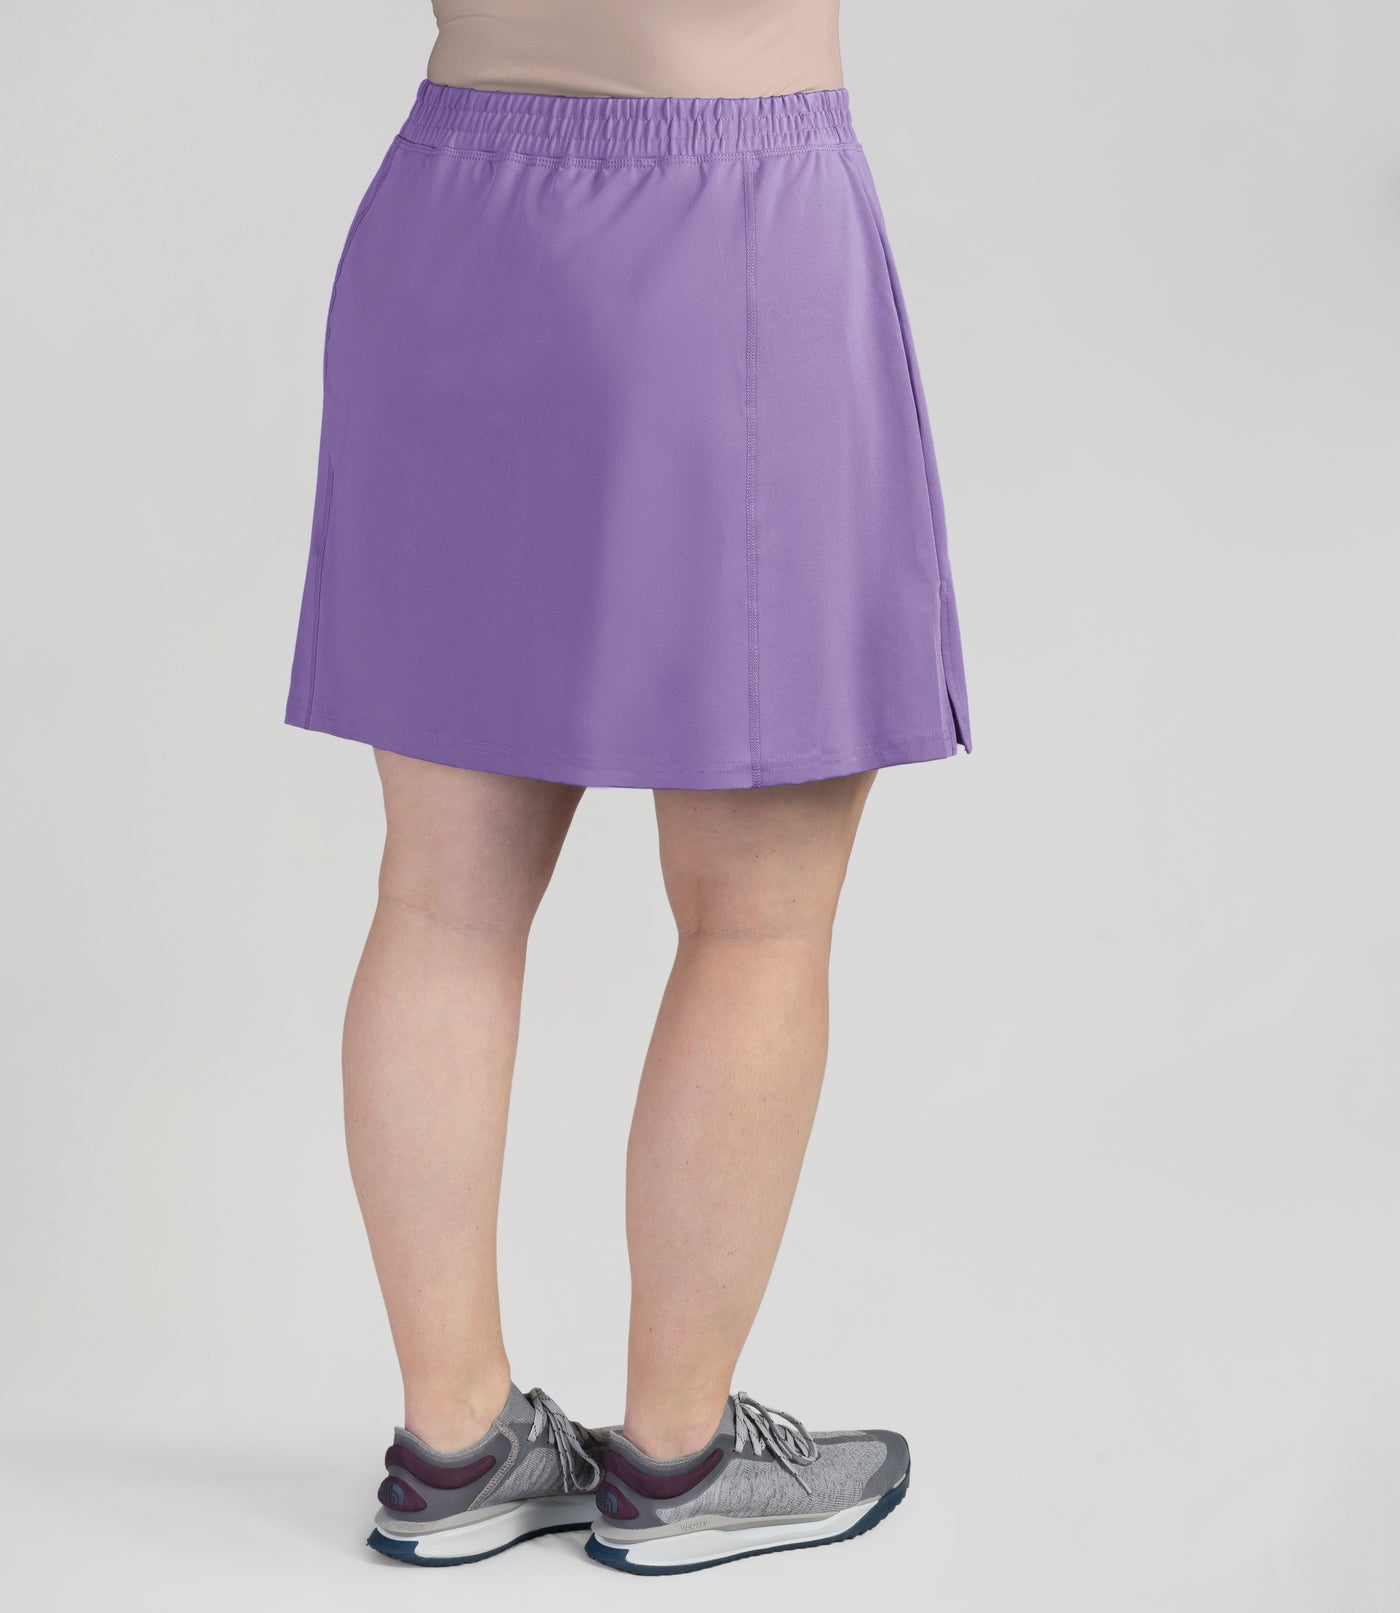 Bottom half of plus sized woman, back view, wearing JunoActives Quikwik lite skirted short in color iris. Skirt hem is a few inches above knee.